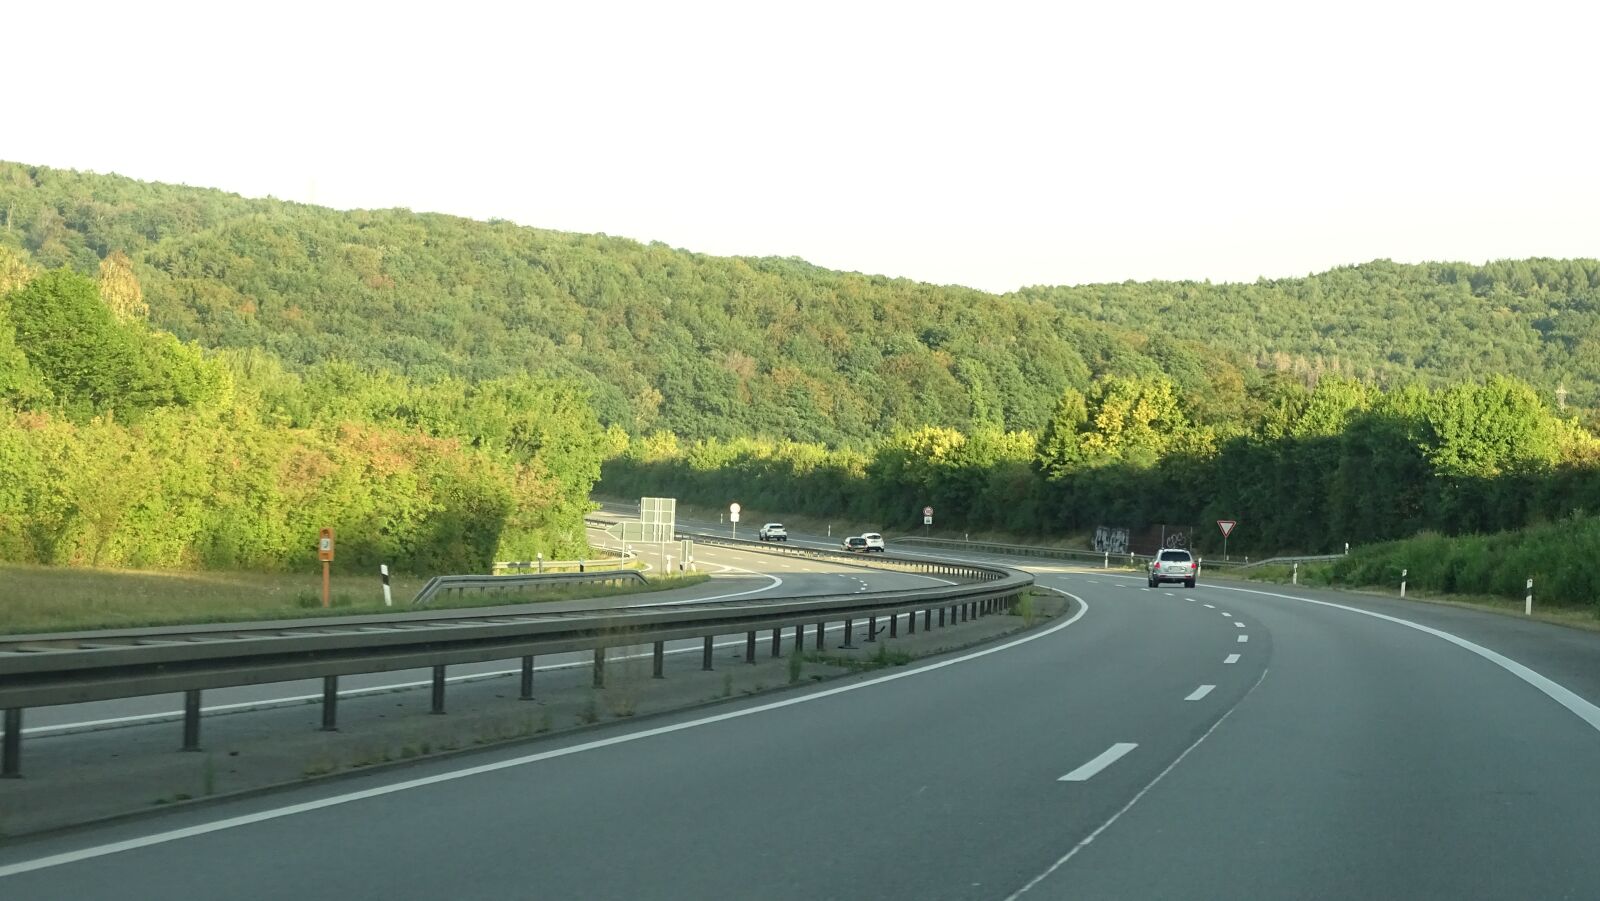 Sony Cyber-shot DSC-HX350 sample photo. Highway, saarland, forest photography